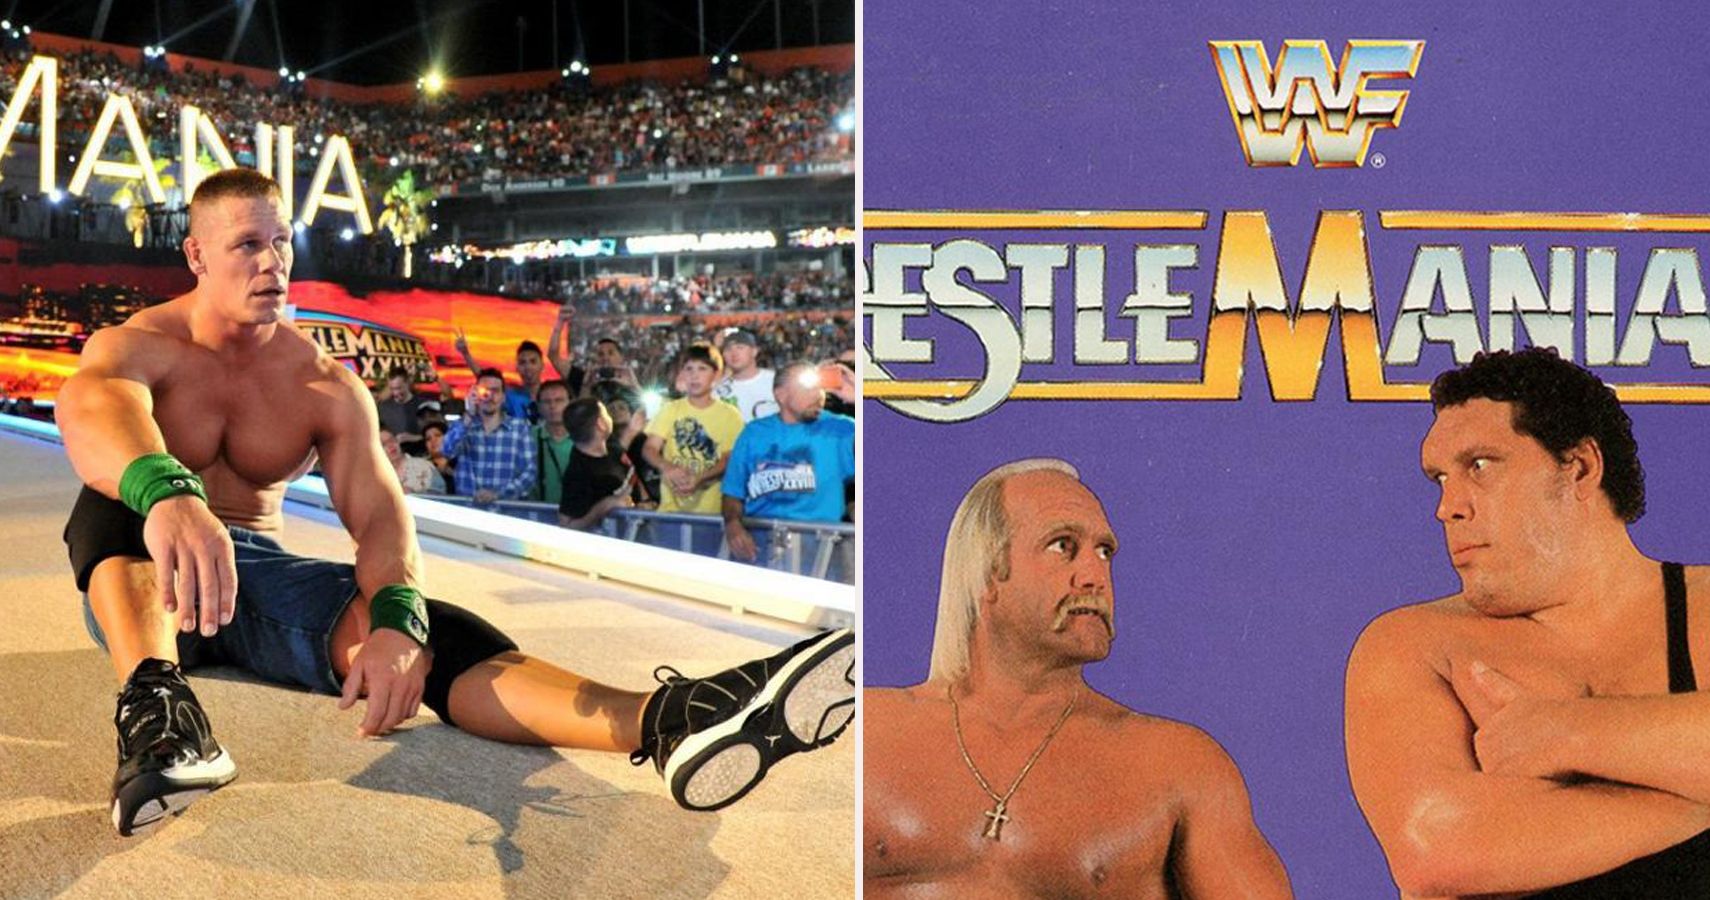 WrestleMania The 10 Largest Events, Ranked By Attendance